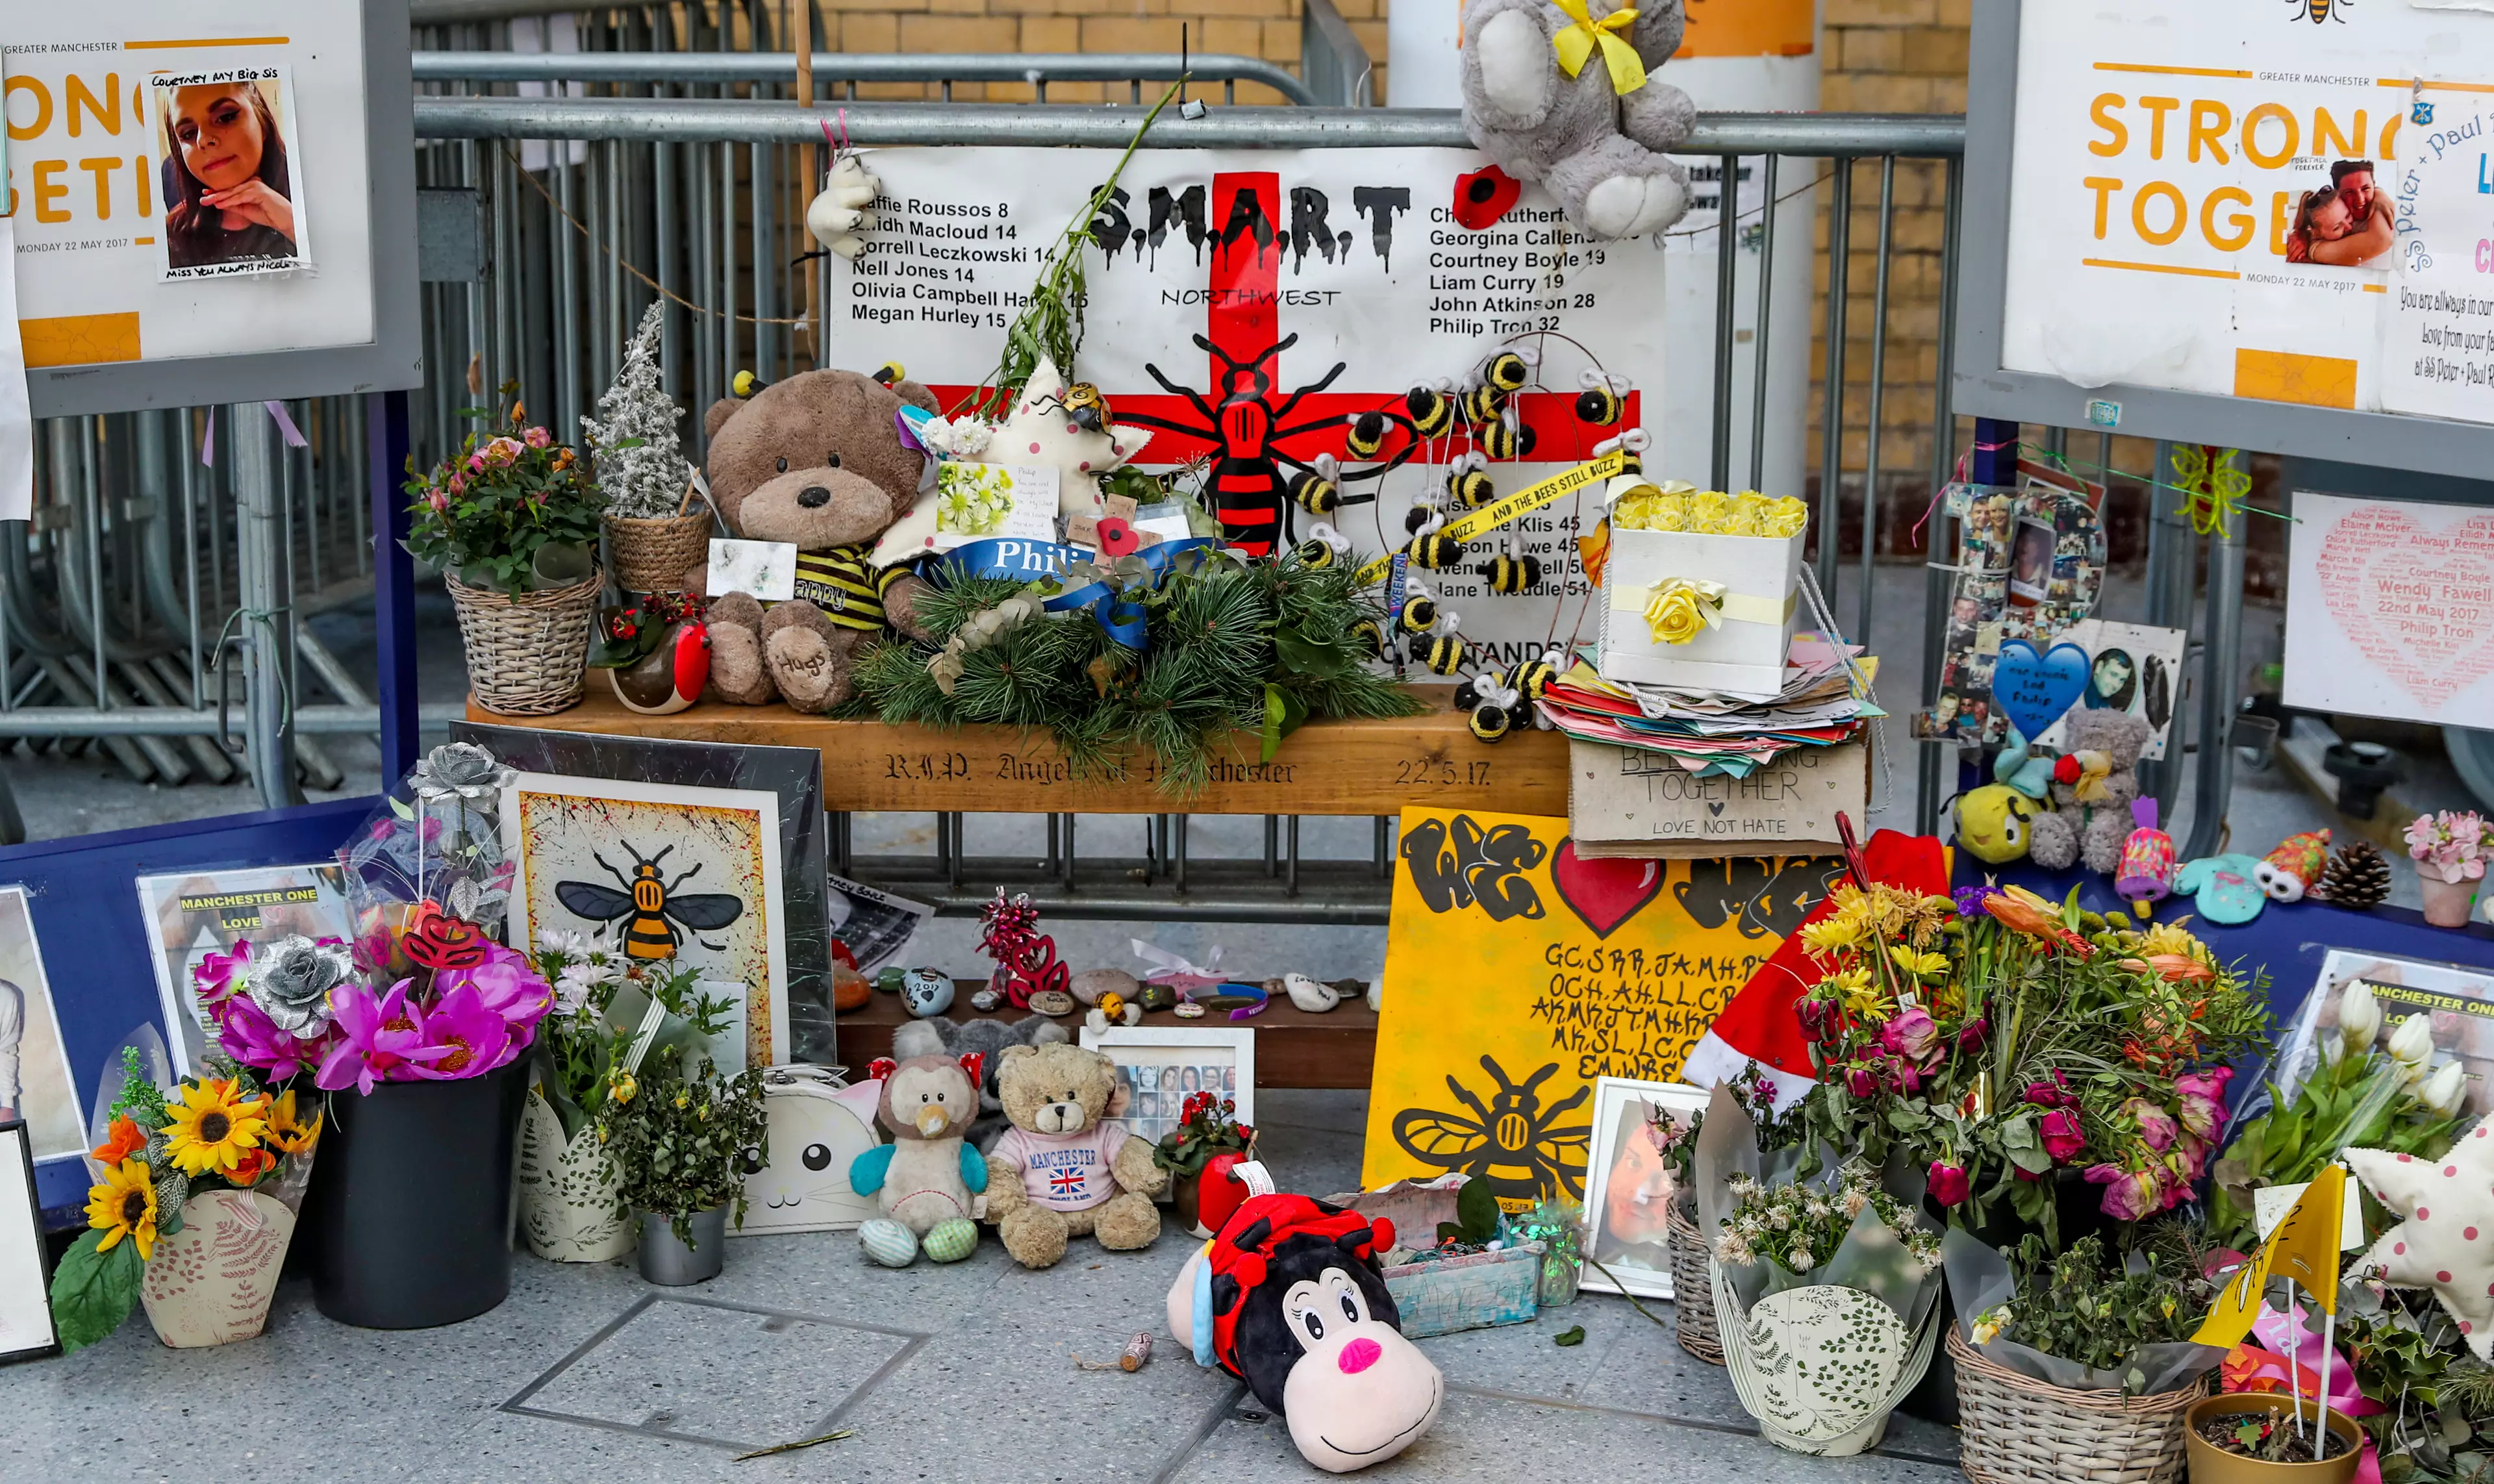 A memorial to the victims of the Manchester Arena bombing at Victoria Station in Manchester. (